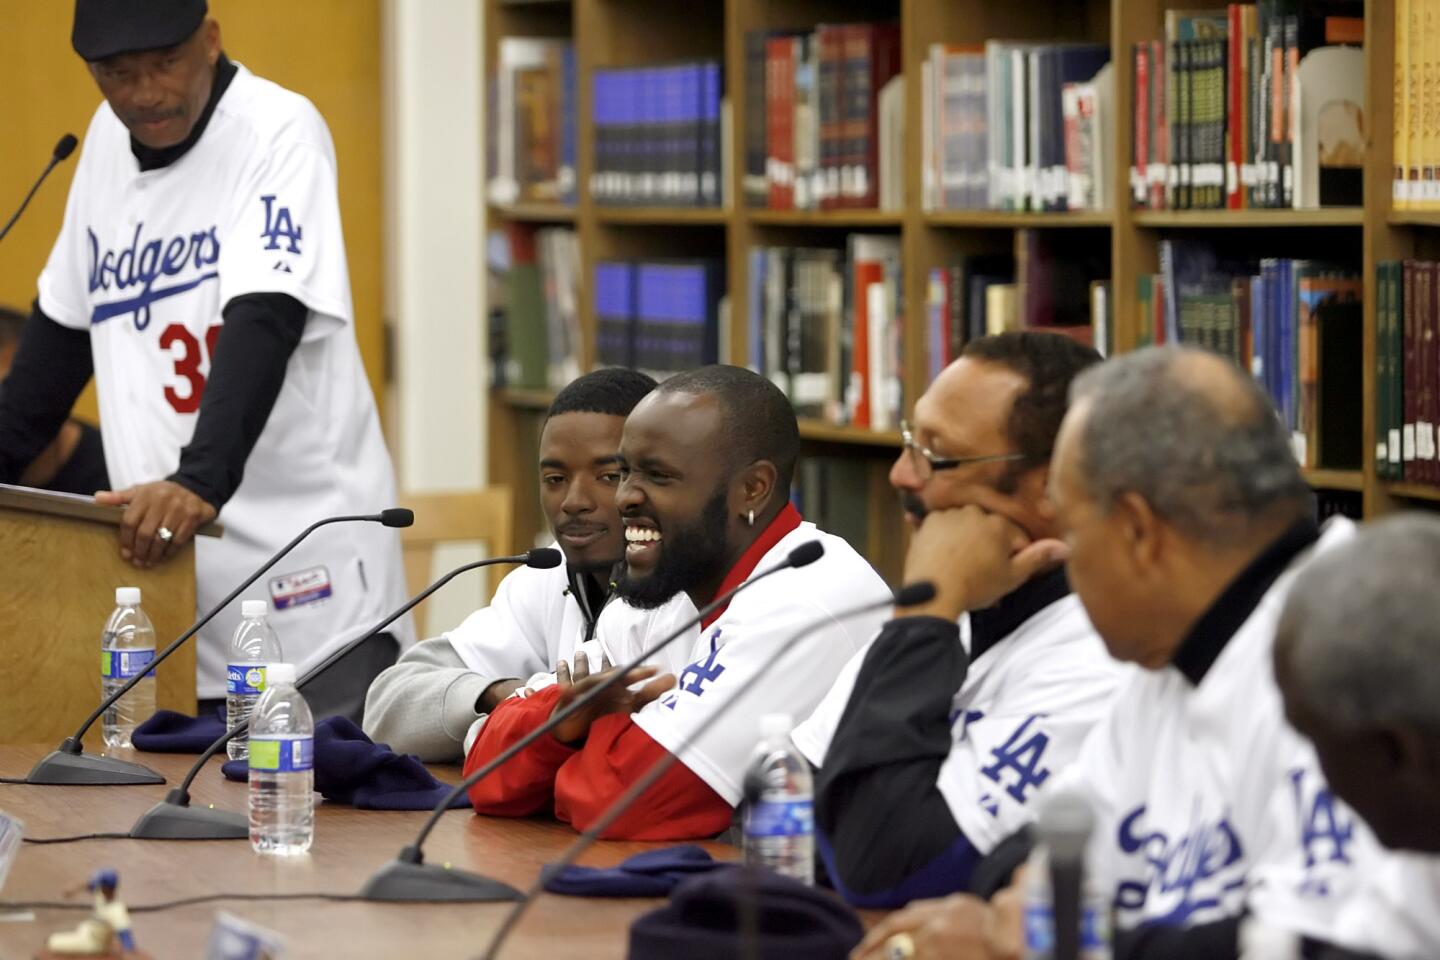 Los Angeles Dodgers player Tony Gwynn Jr., third from left, joined other team greats at Muir High School in Pasadena on Friday, April 13, 2012. The players spoke about former Muir High graduate and local and national hero Jackie Robinson and encouraged students to follow their dreams. From left, Derrel Thomas, Dee Gordon, Gwynn, Jr., Kenny Landreaux, Tommy davis and "Sweet" Lou Johnson.